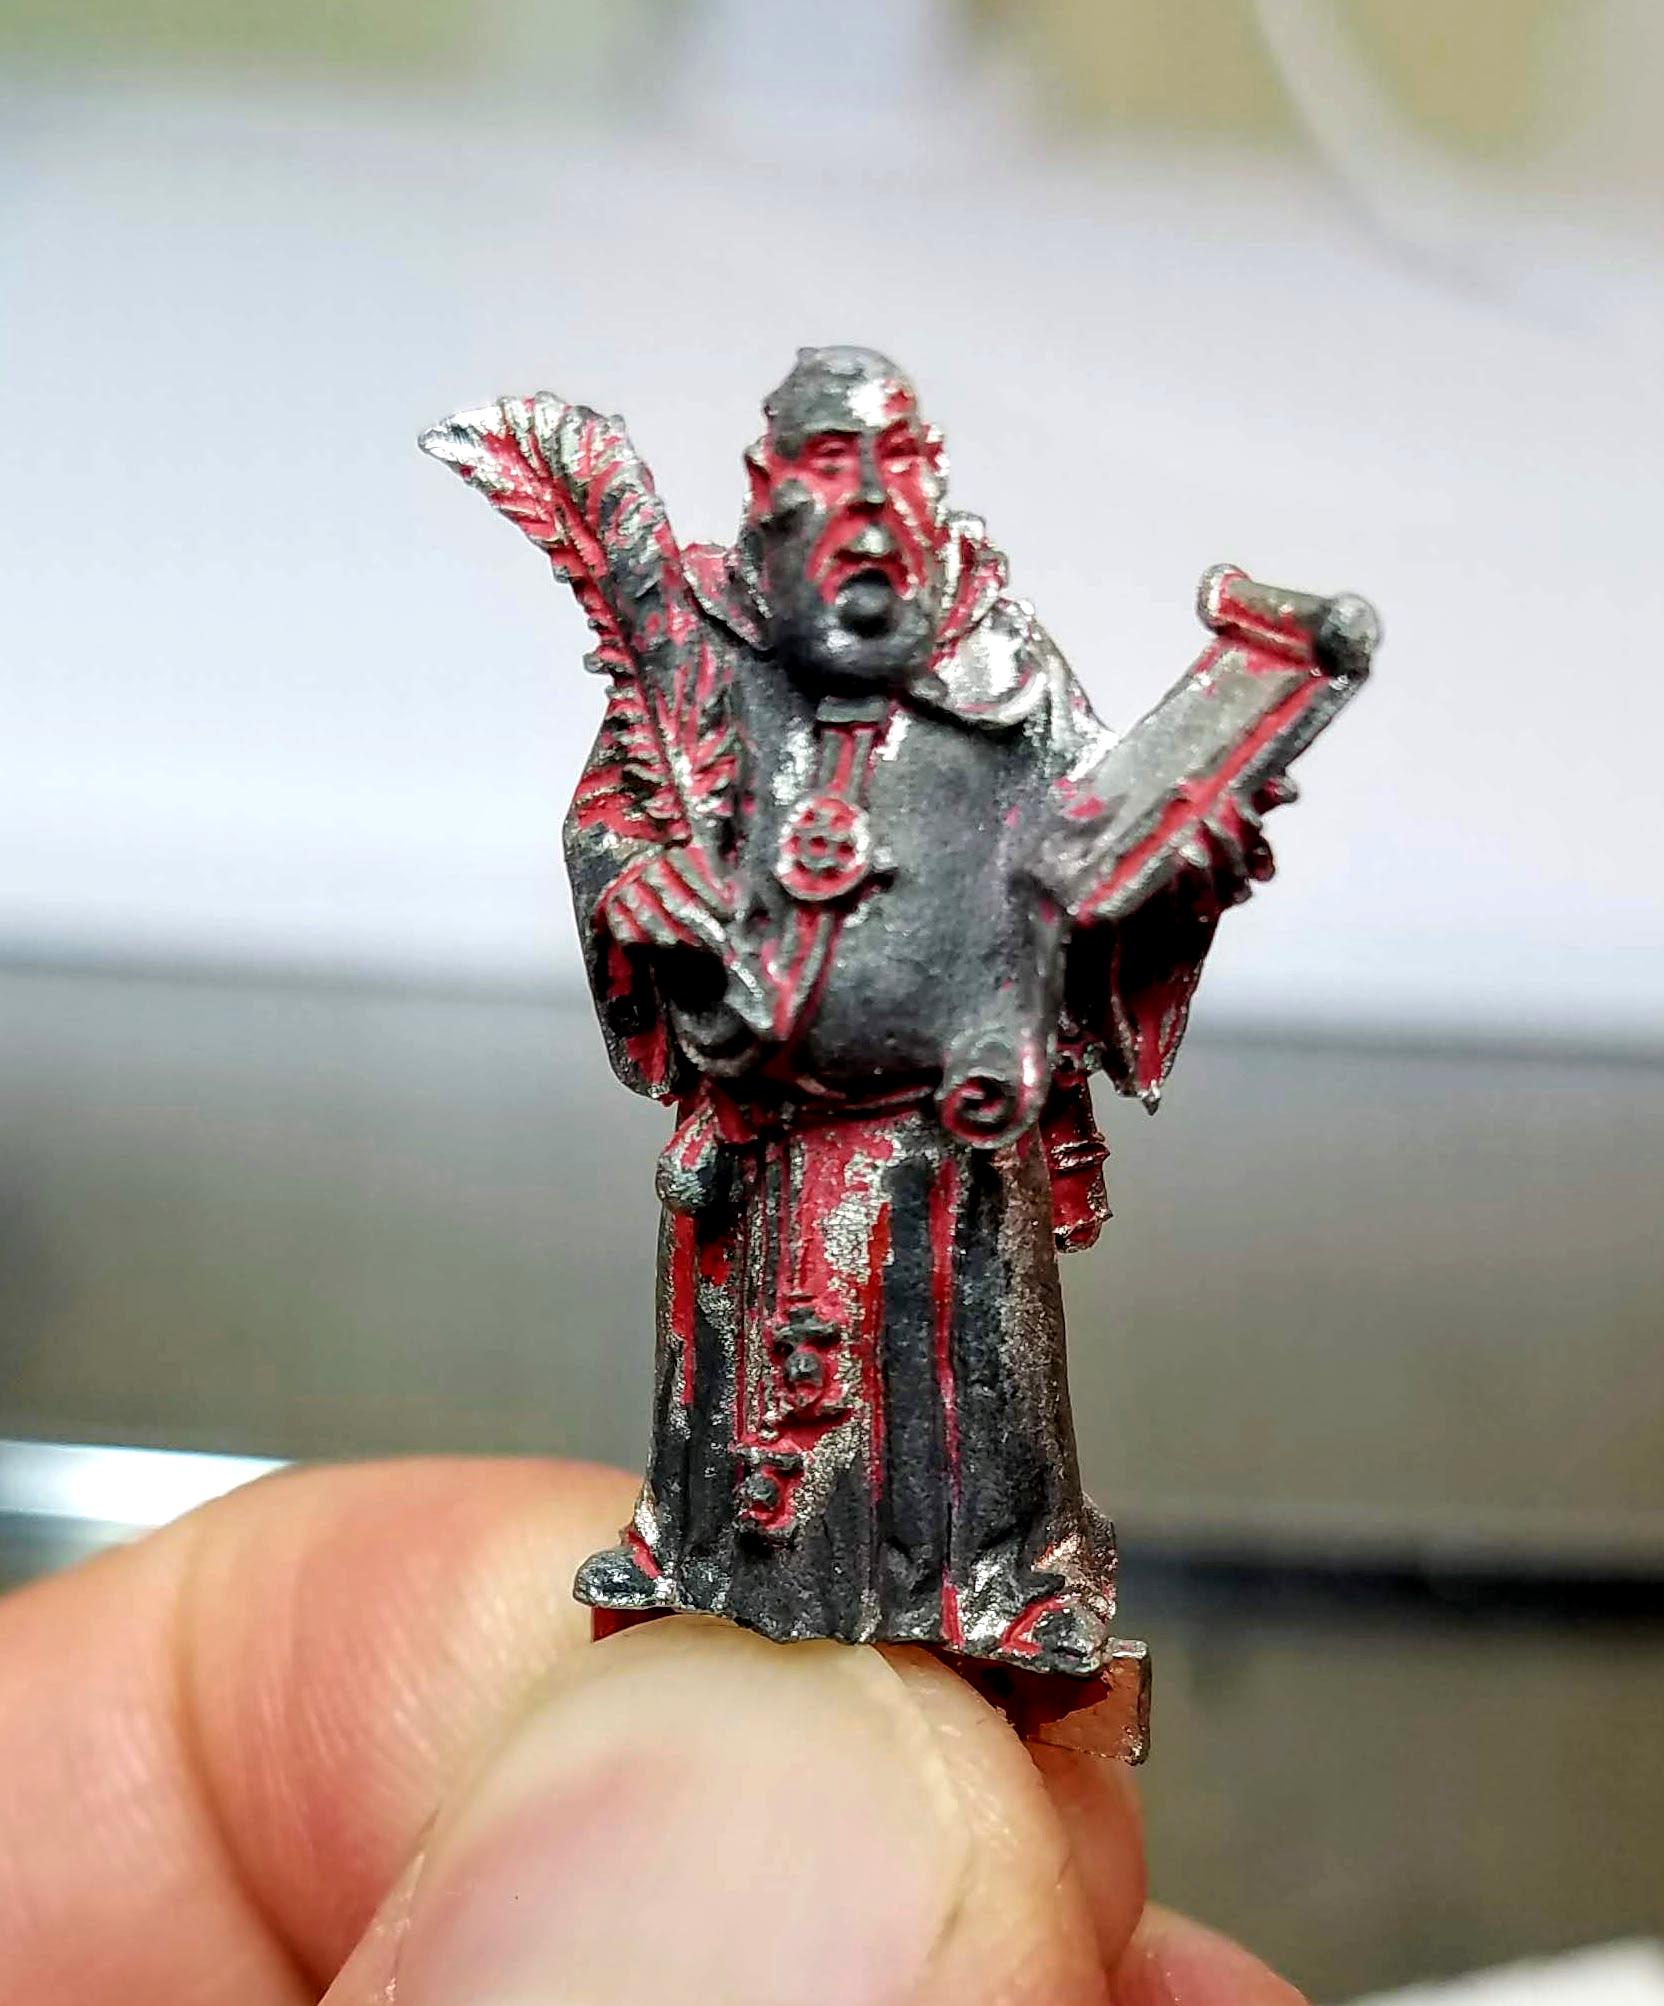 A poorly stripped Inquisitorial scribe